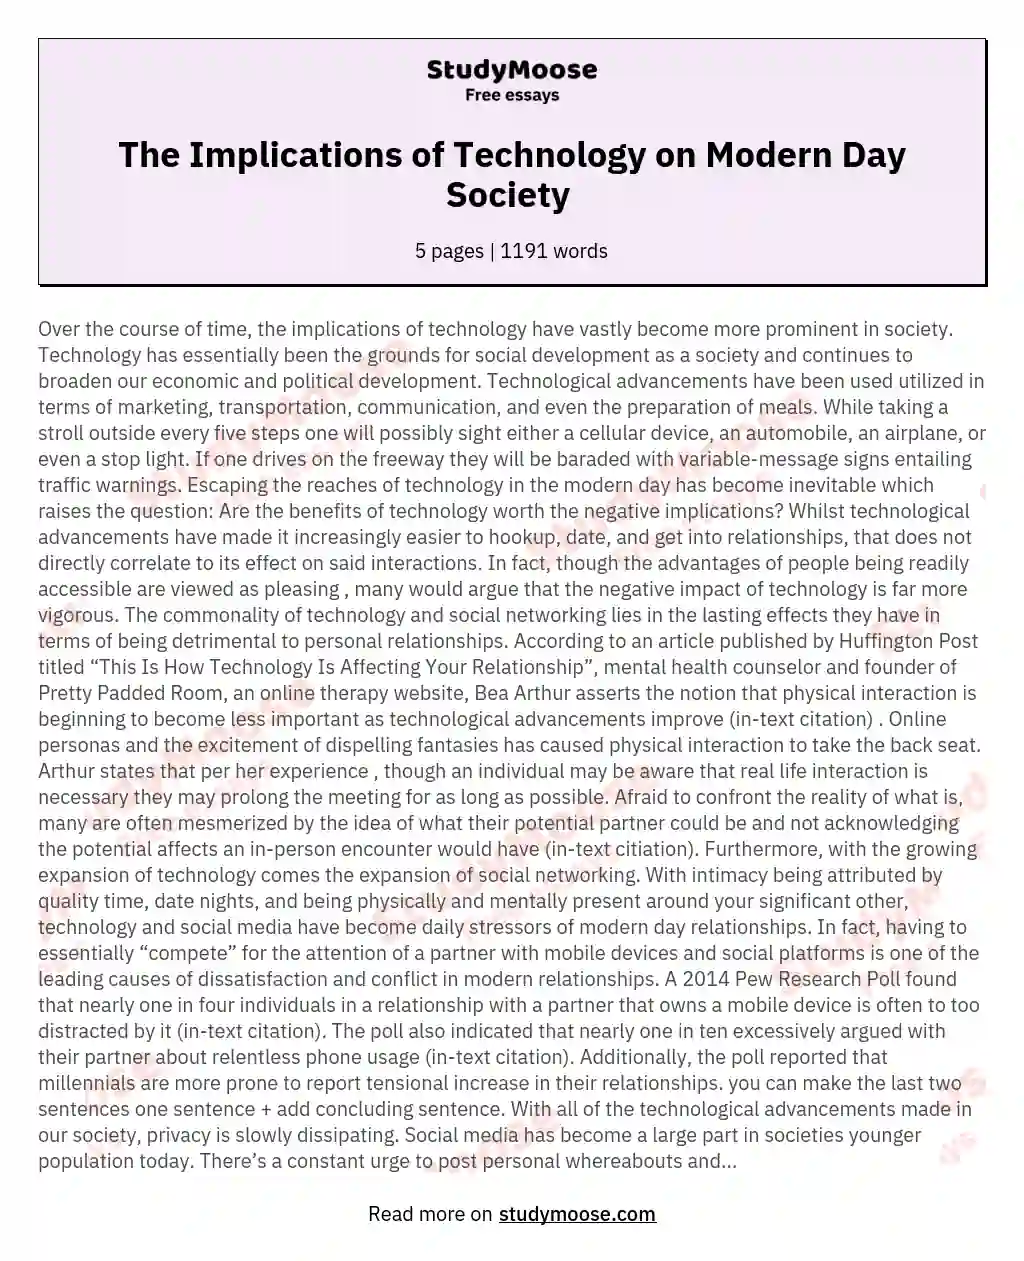 The Implications of Technology on Modern Day Society  essay